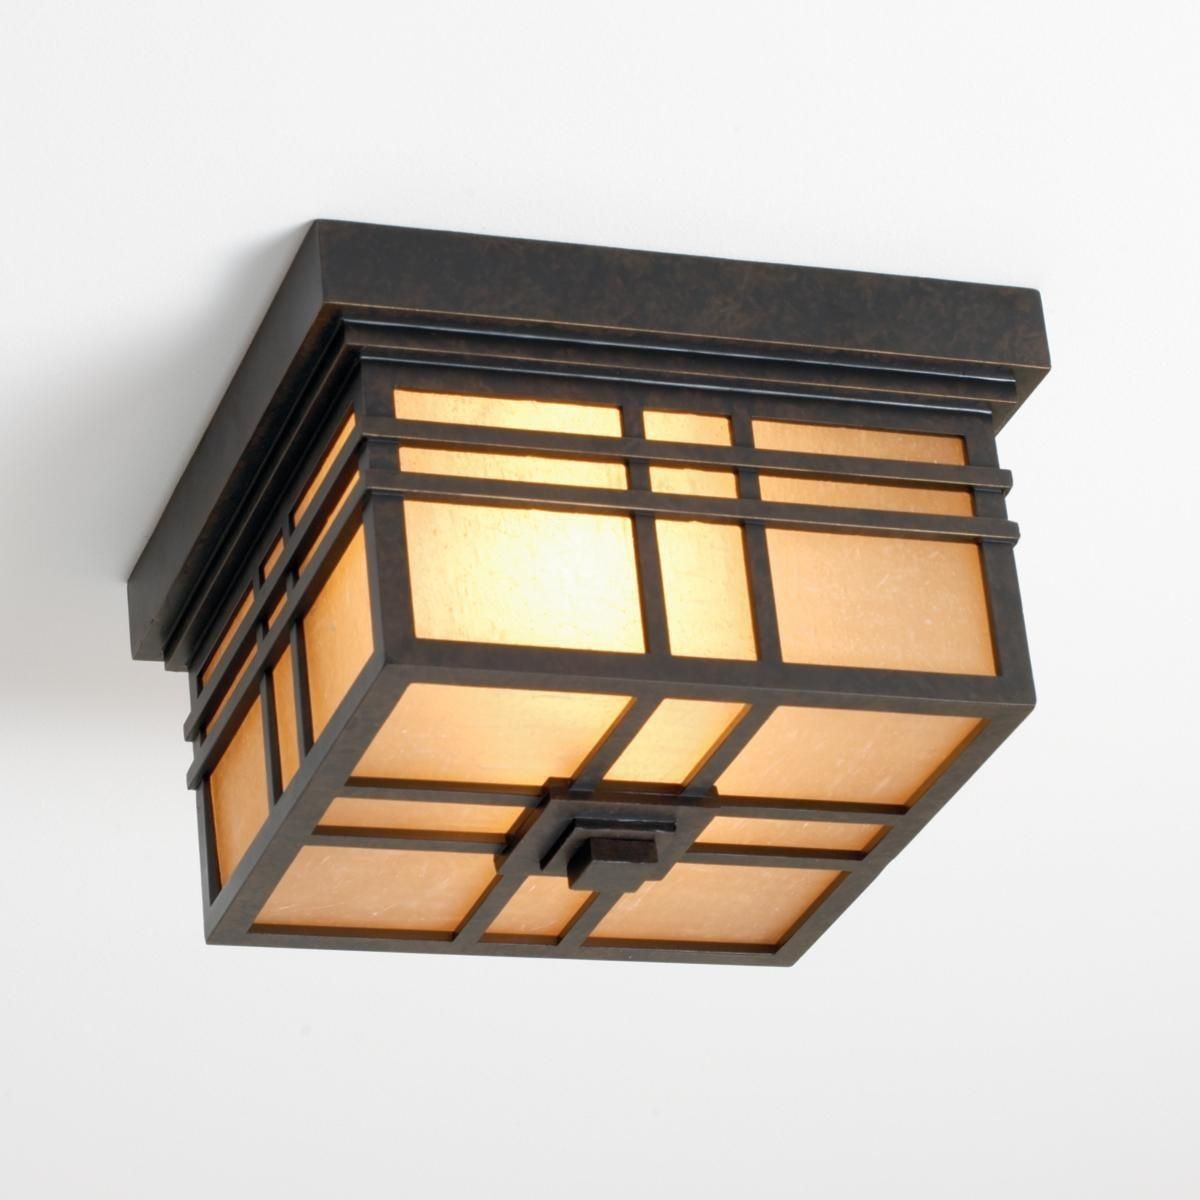 Bronze Craftsman Mission Indoor Or Outdoor Ceiling Light | Home Intended For Craftsman Outdoor Ceiling Lights (View 15 of 15)